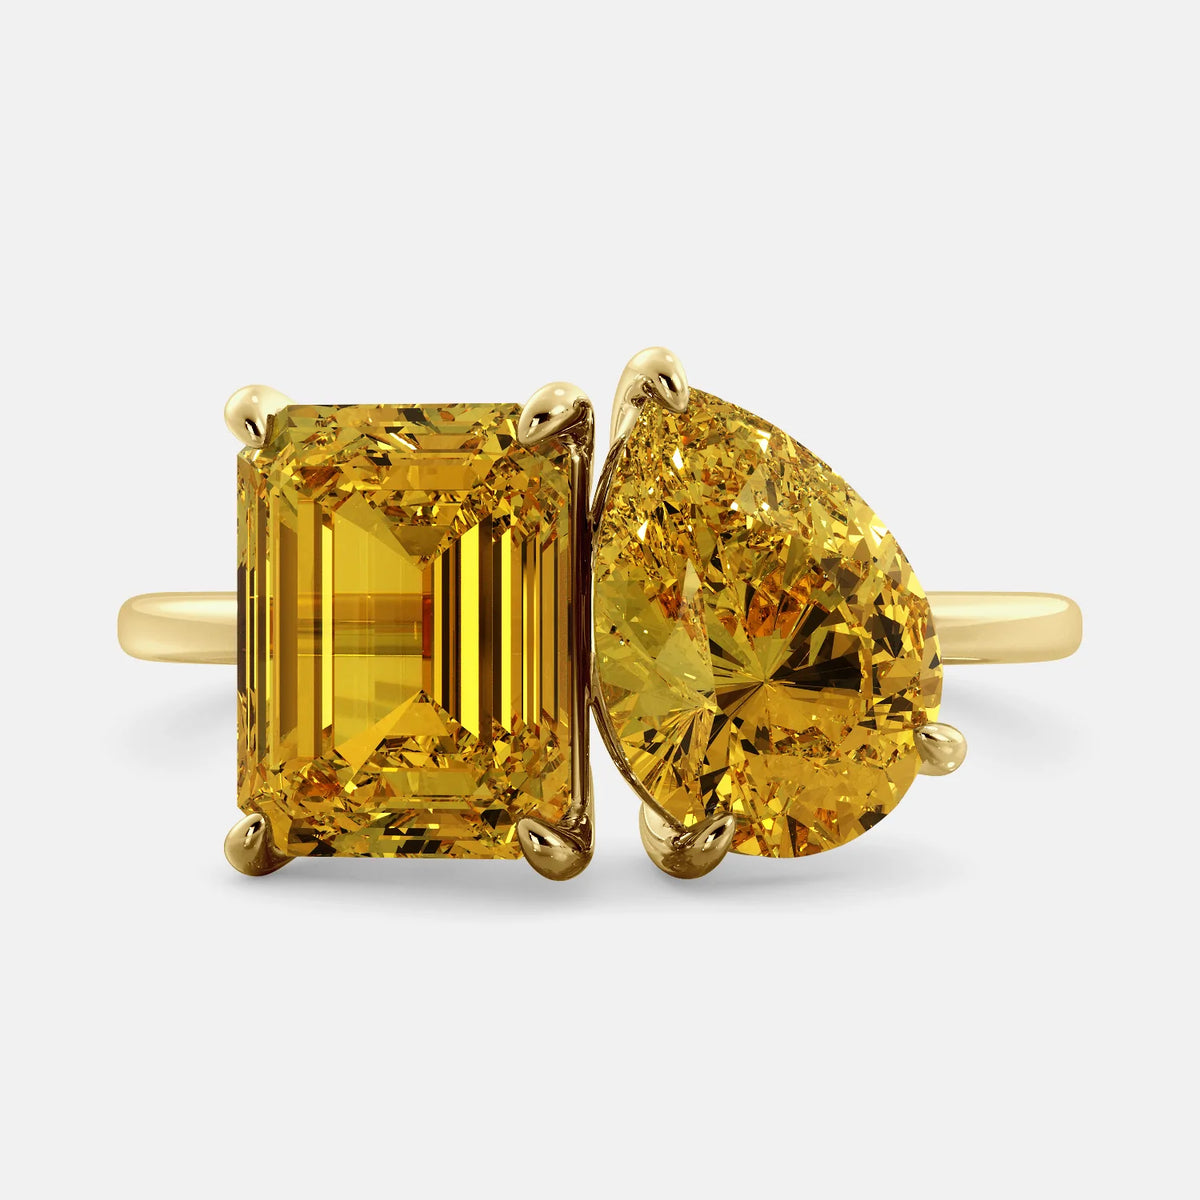 A toi et moi ring with two citrine gemstones. The first gemstone is an emerald cut, and the second gemstone is a pear shape. The ring is made of 14k yellow gold and is set on a dainty band. The gemstones are sparkling in the light and are a beautiful and meaningful piece of jewelry.